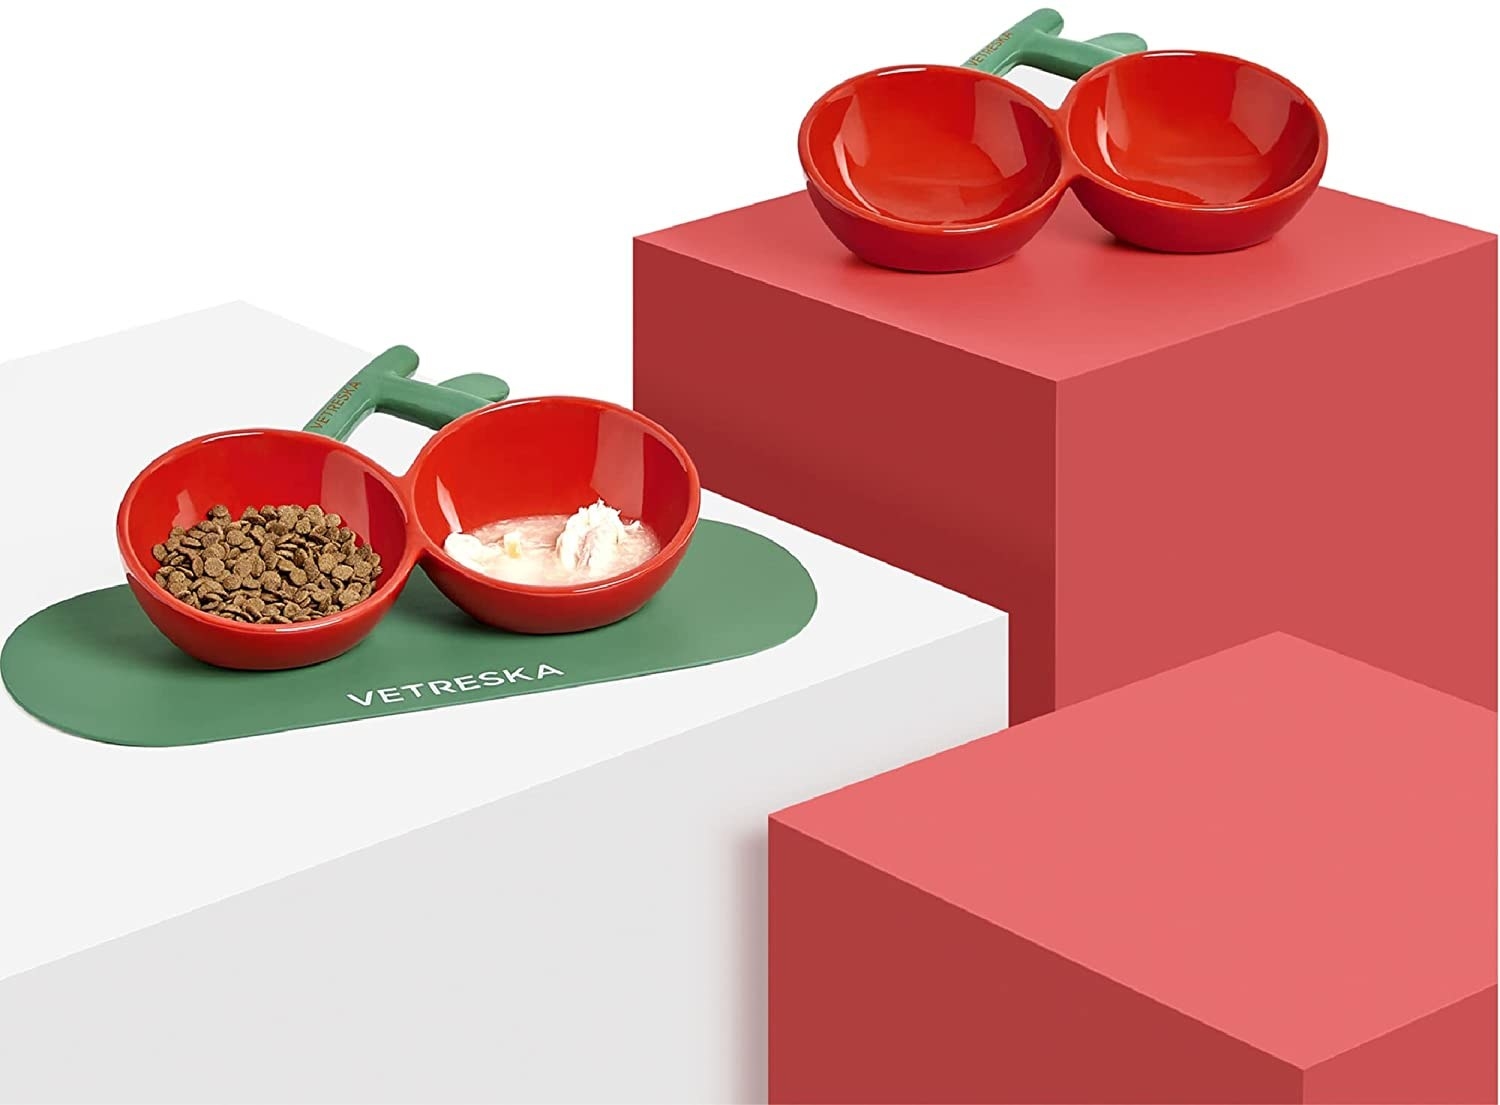 cherry food bowls on abstract tables